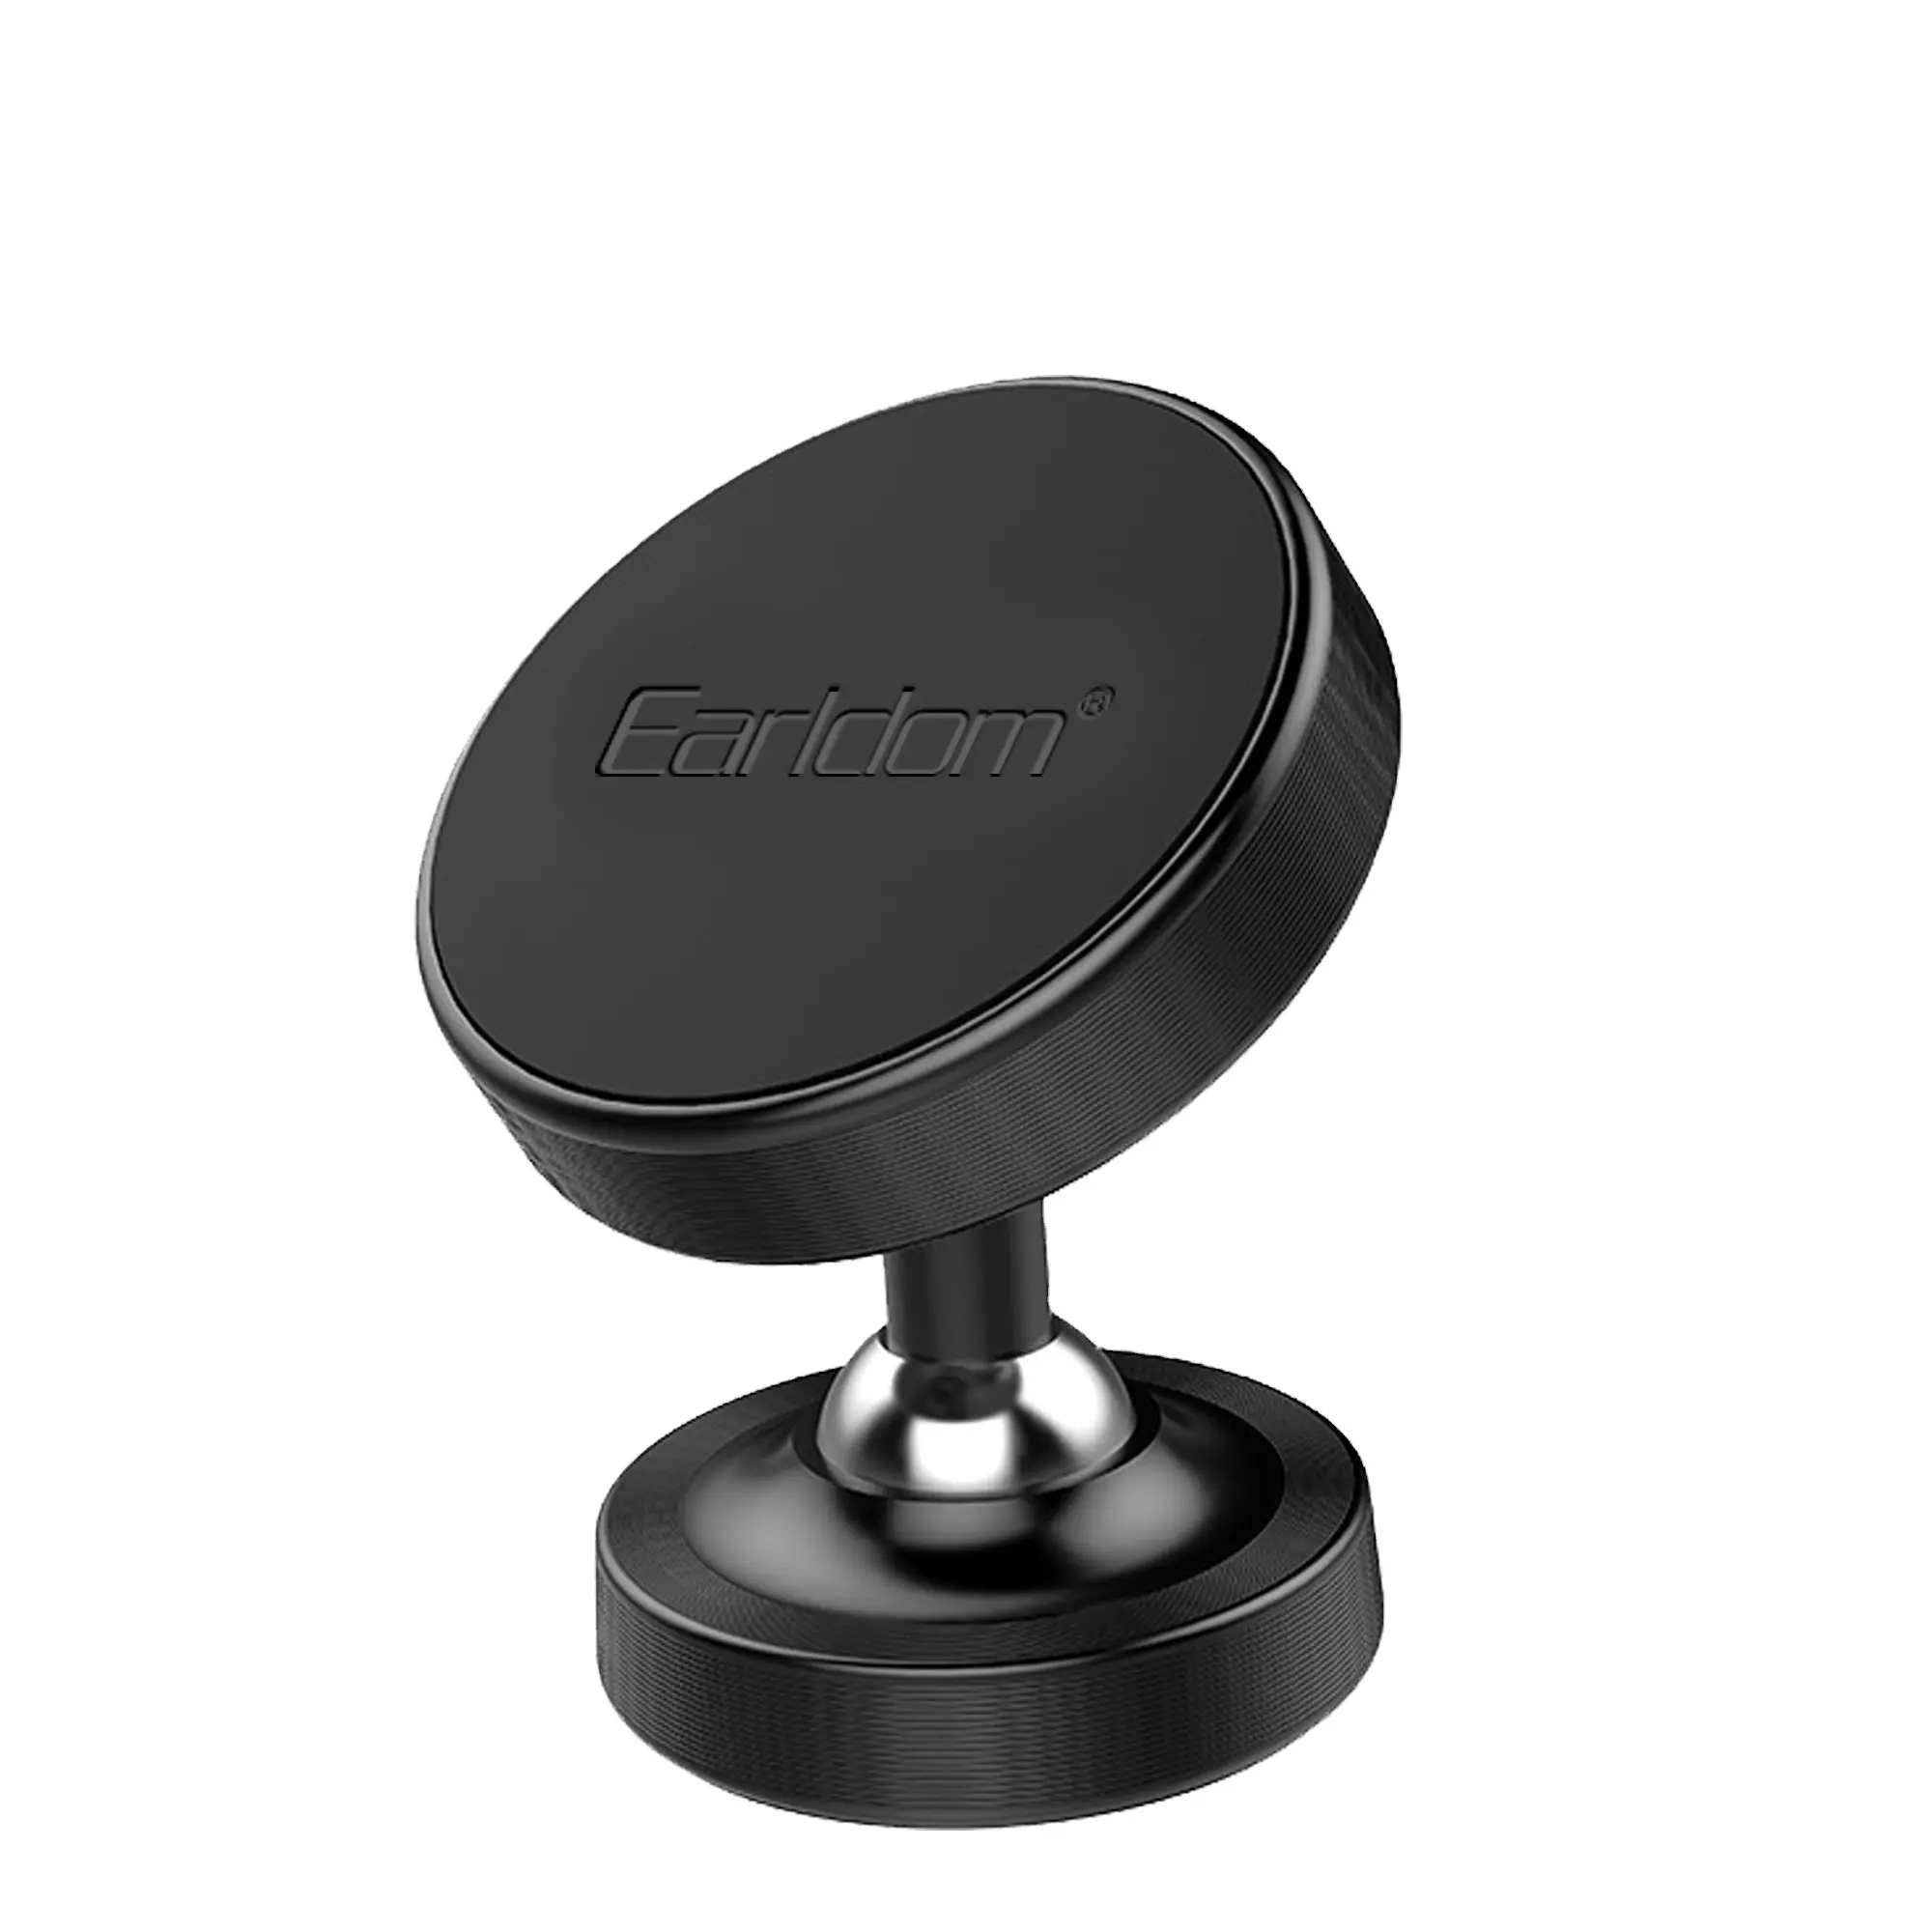 EARLDOM Magnetic Phone Holder For Phone In Car 360 Degree Rotating Car Phone Holder Strong Magnet Holder Stand